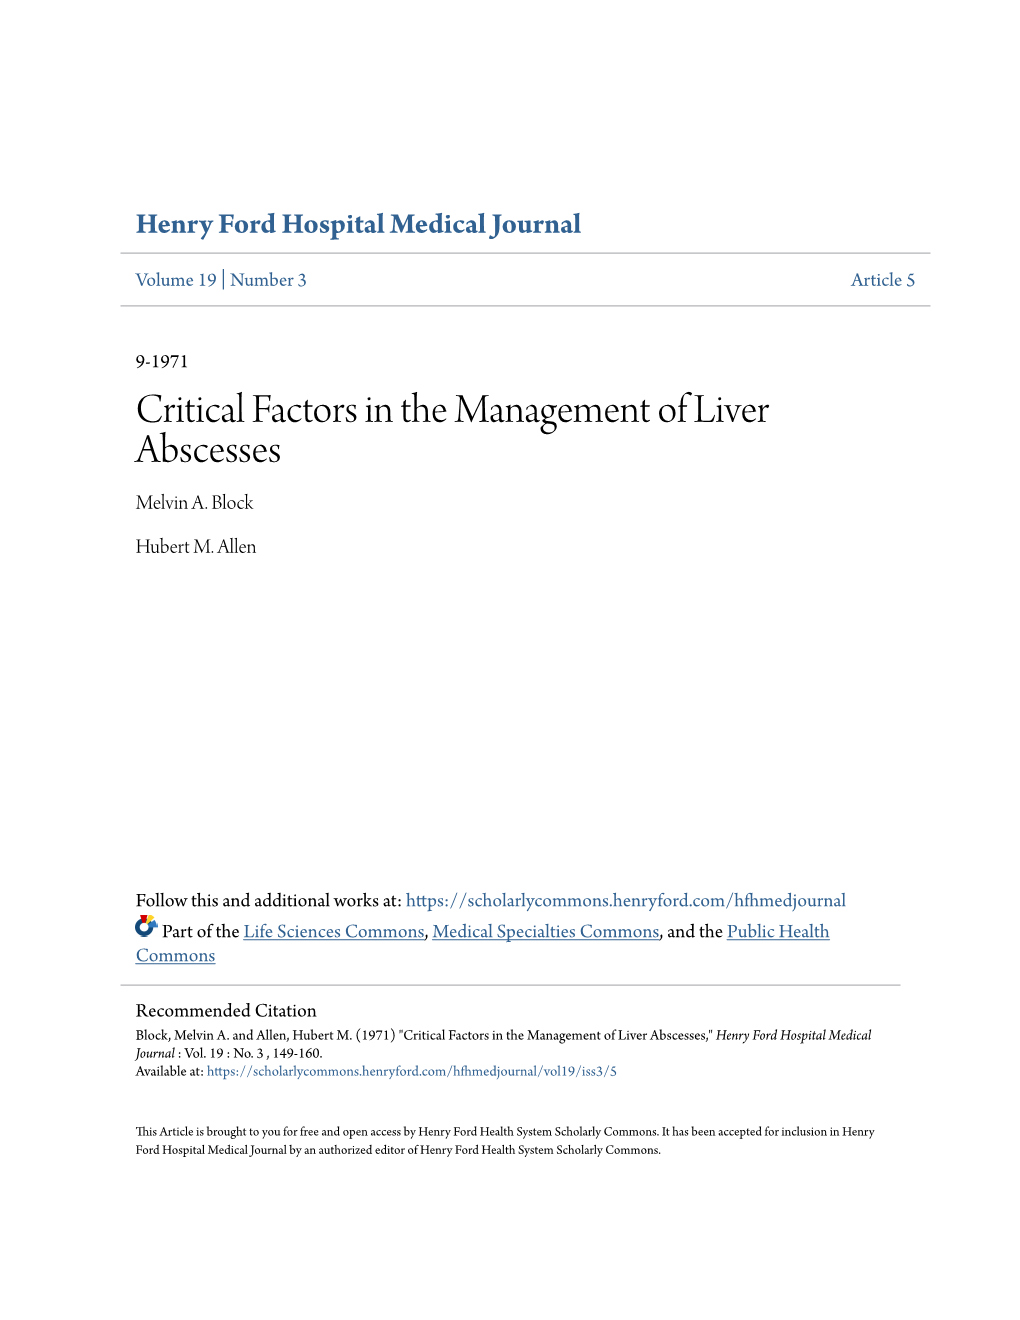 Critical Factors in the Management of Liver Abscesses Melvin A